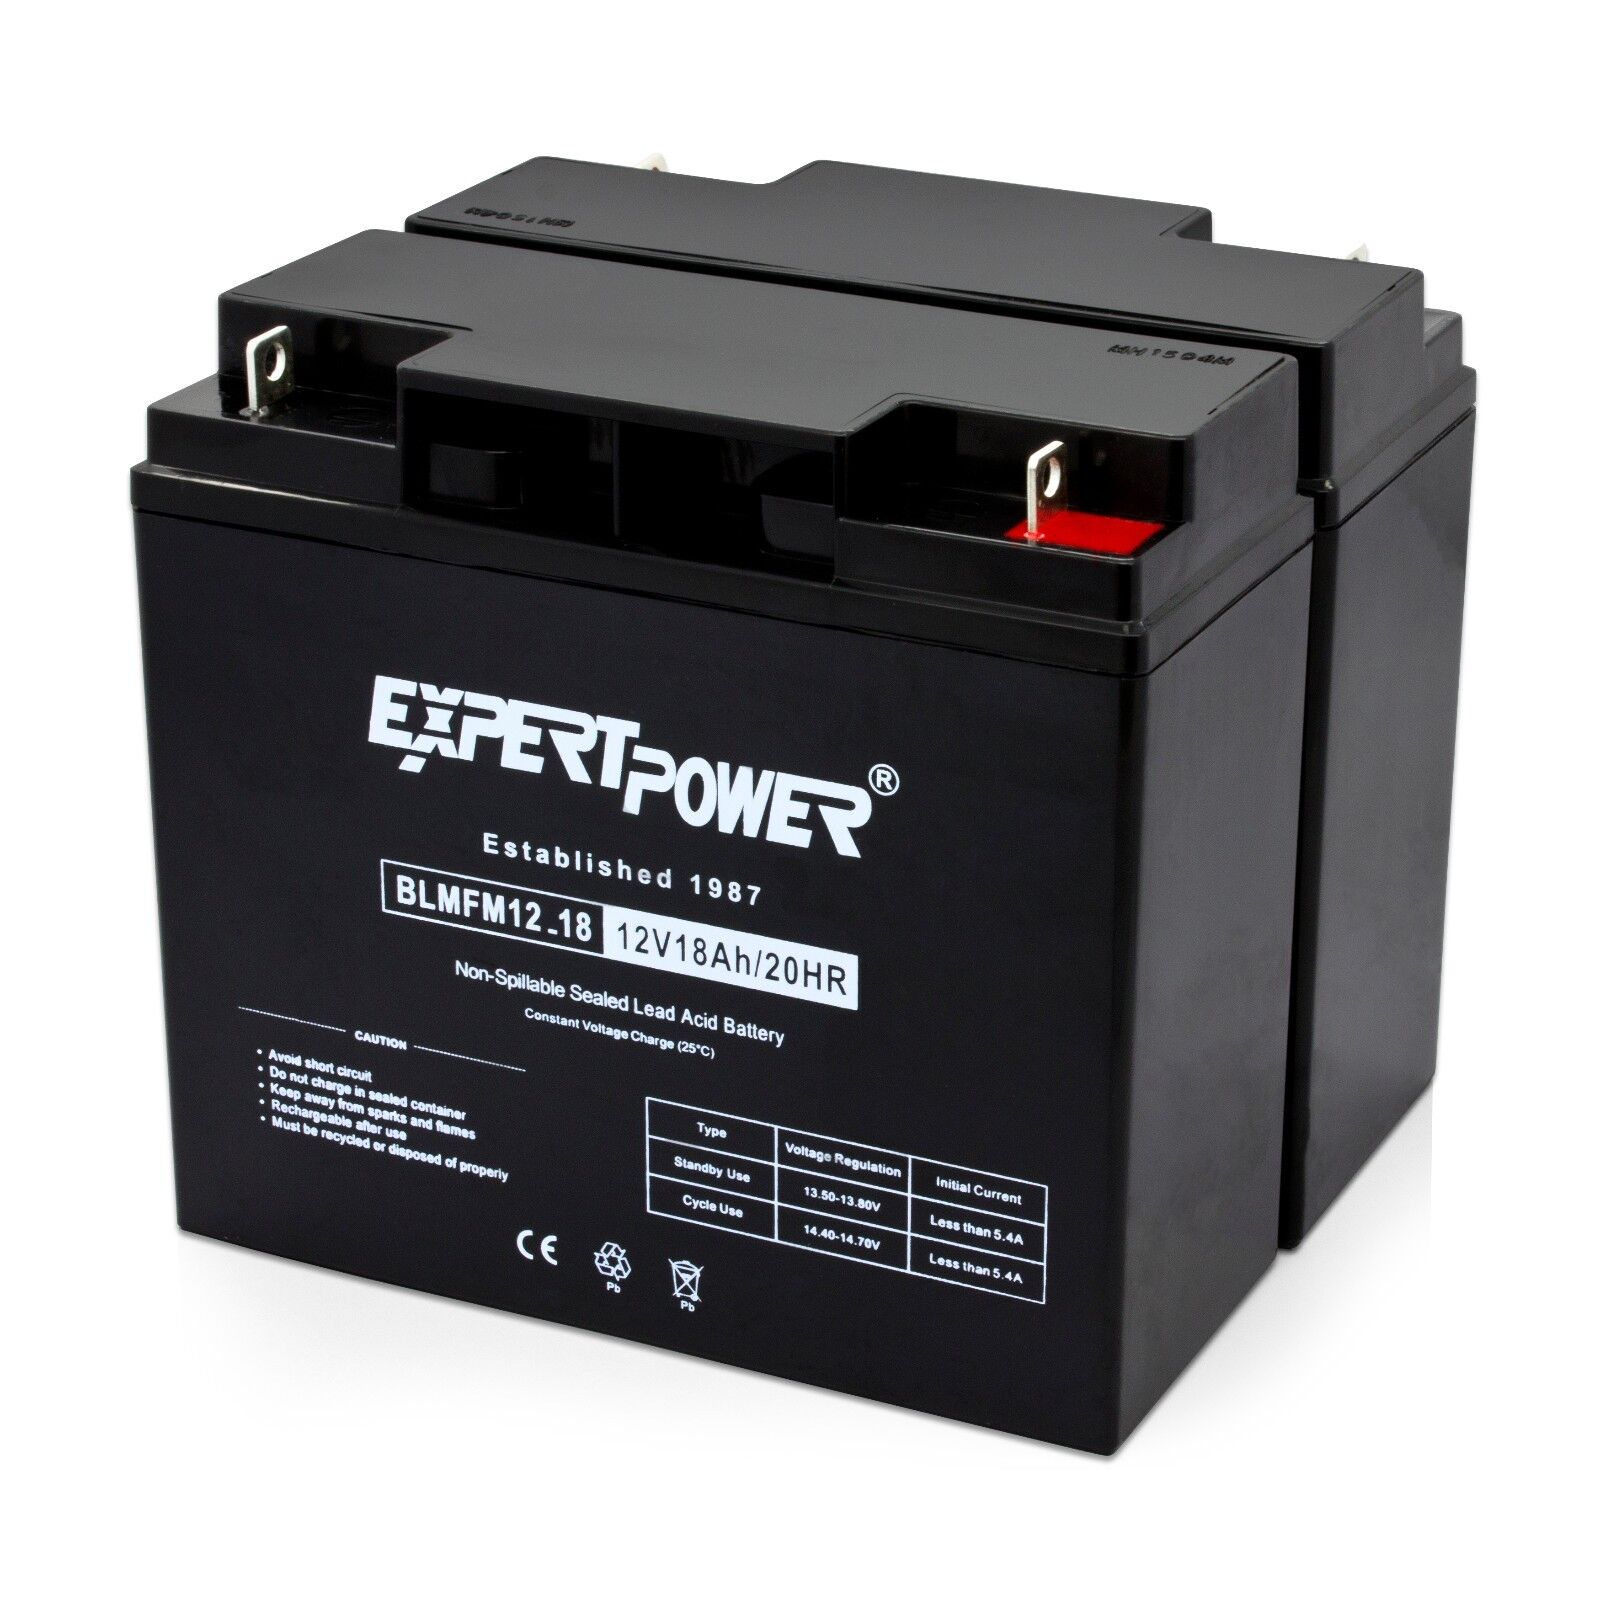 2 EXP12180 12V 18AH Battery for APC SmartUps 1400 1500 [Replacement for UB12180] ExpertPower EXP12180 - фотография #3